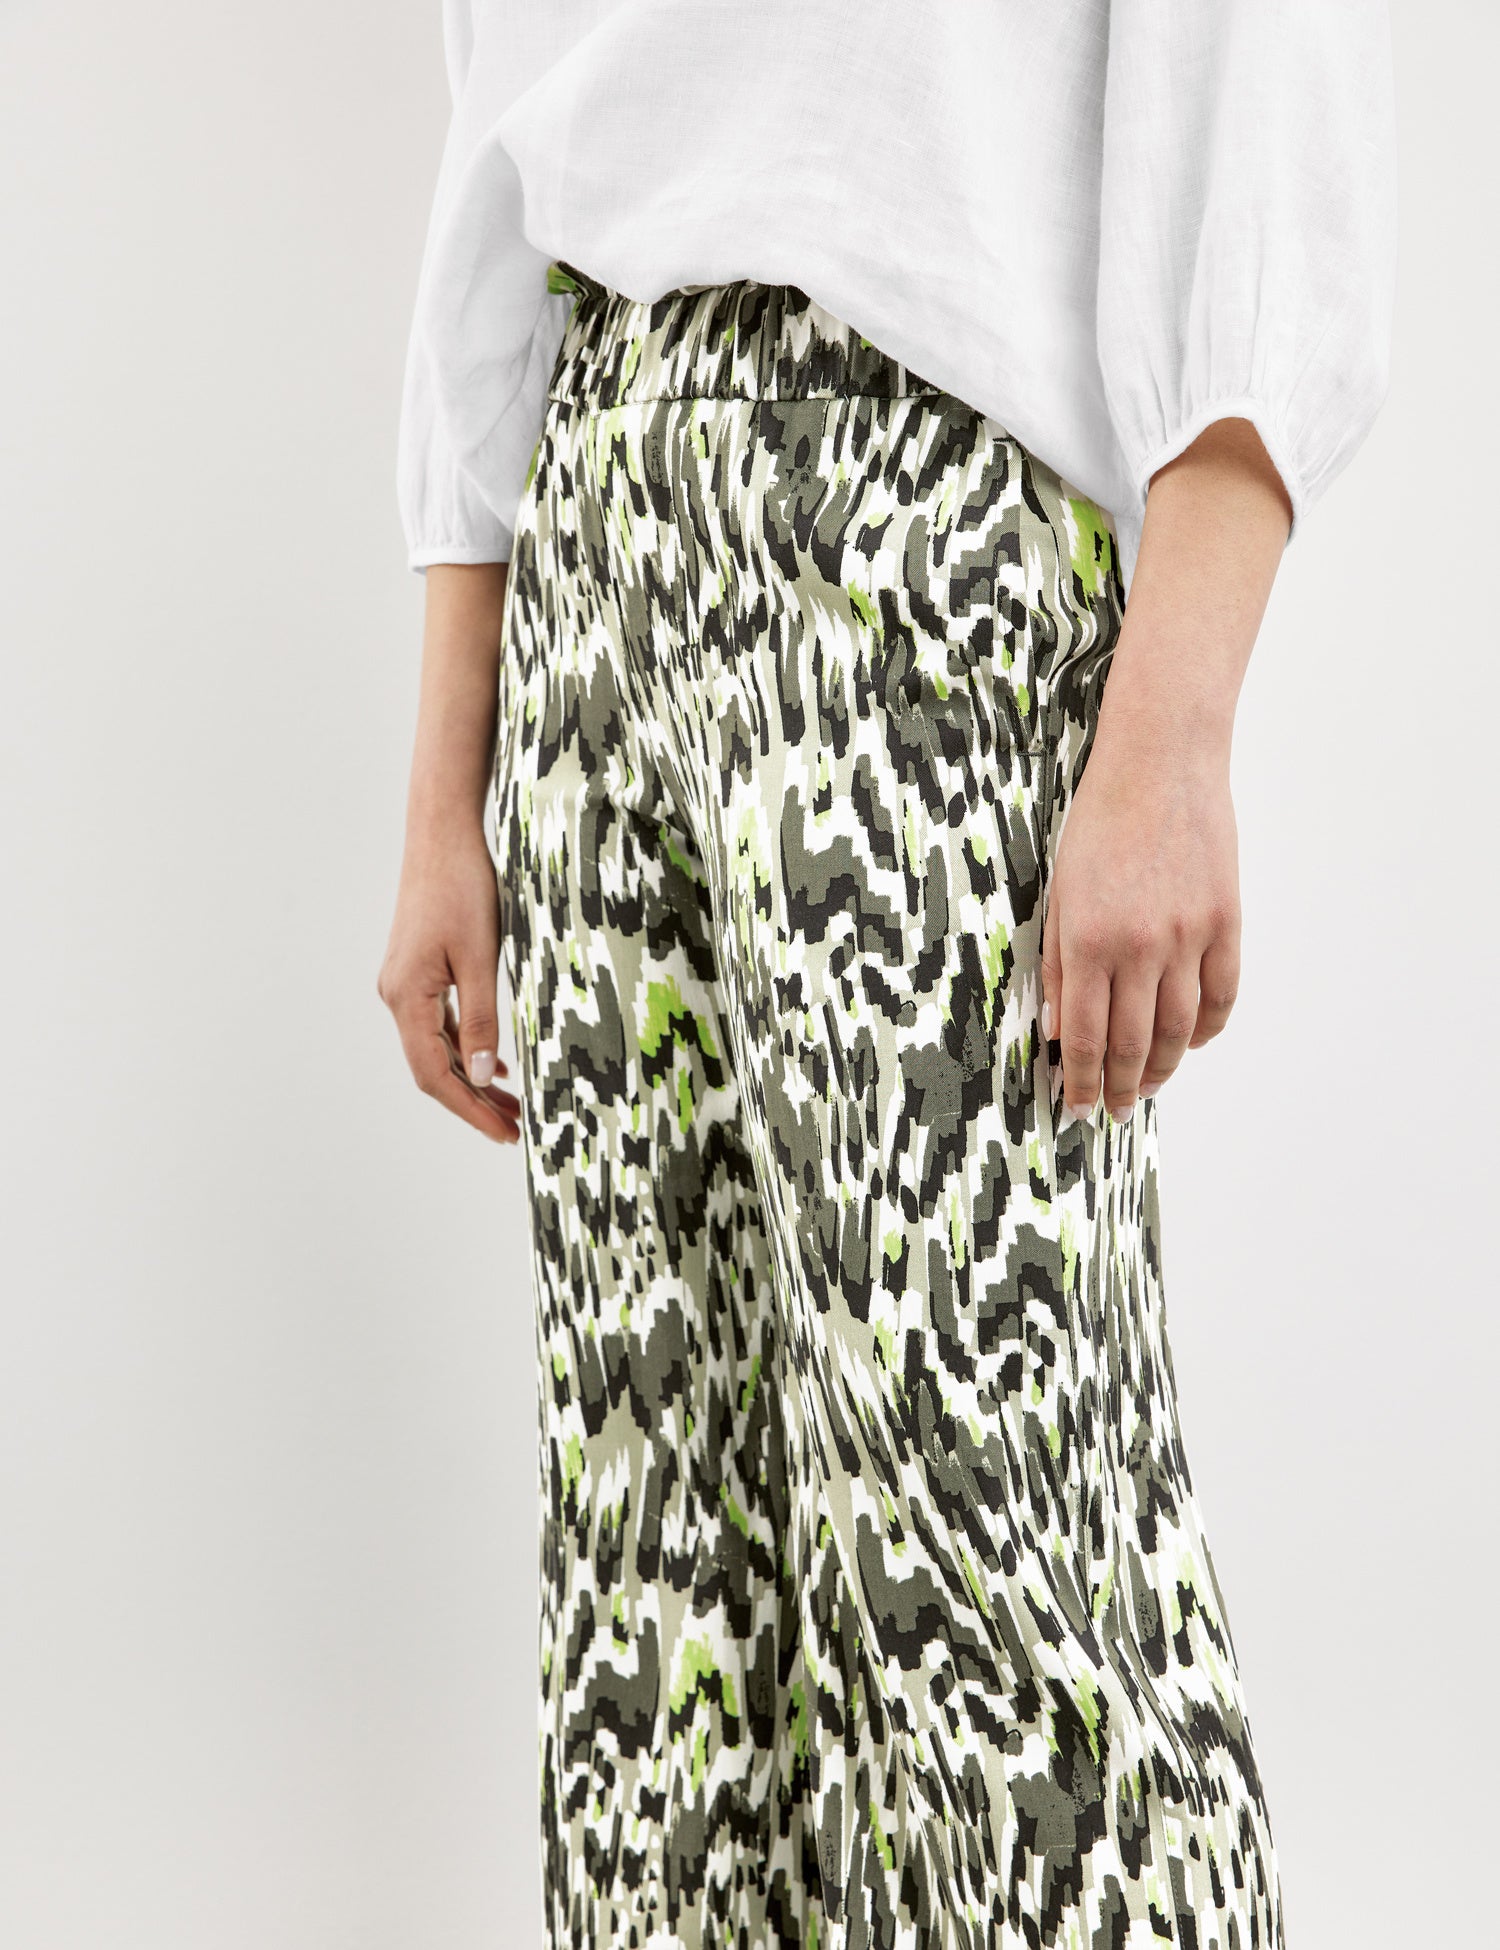 Patterned Jersey Trousers With A Wide Leg